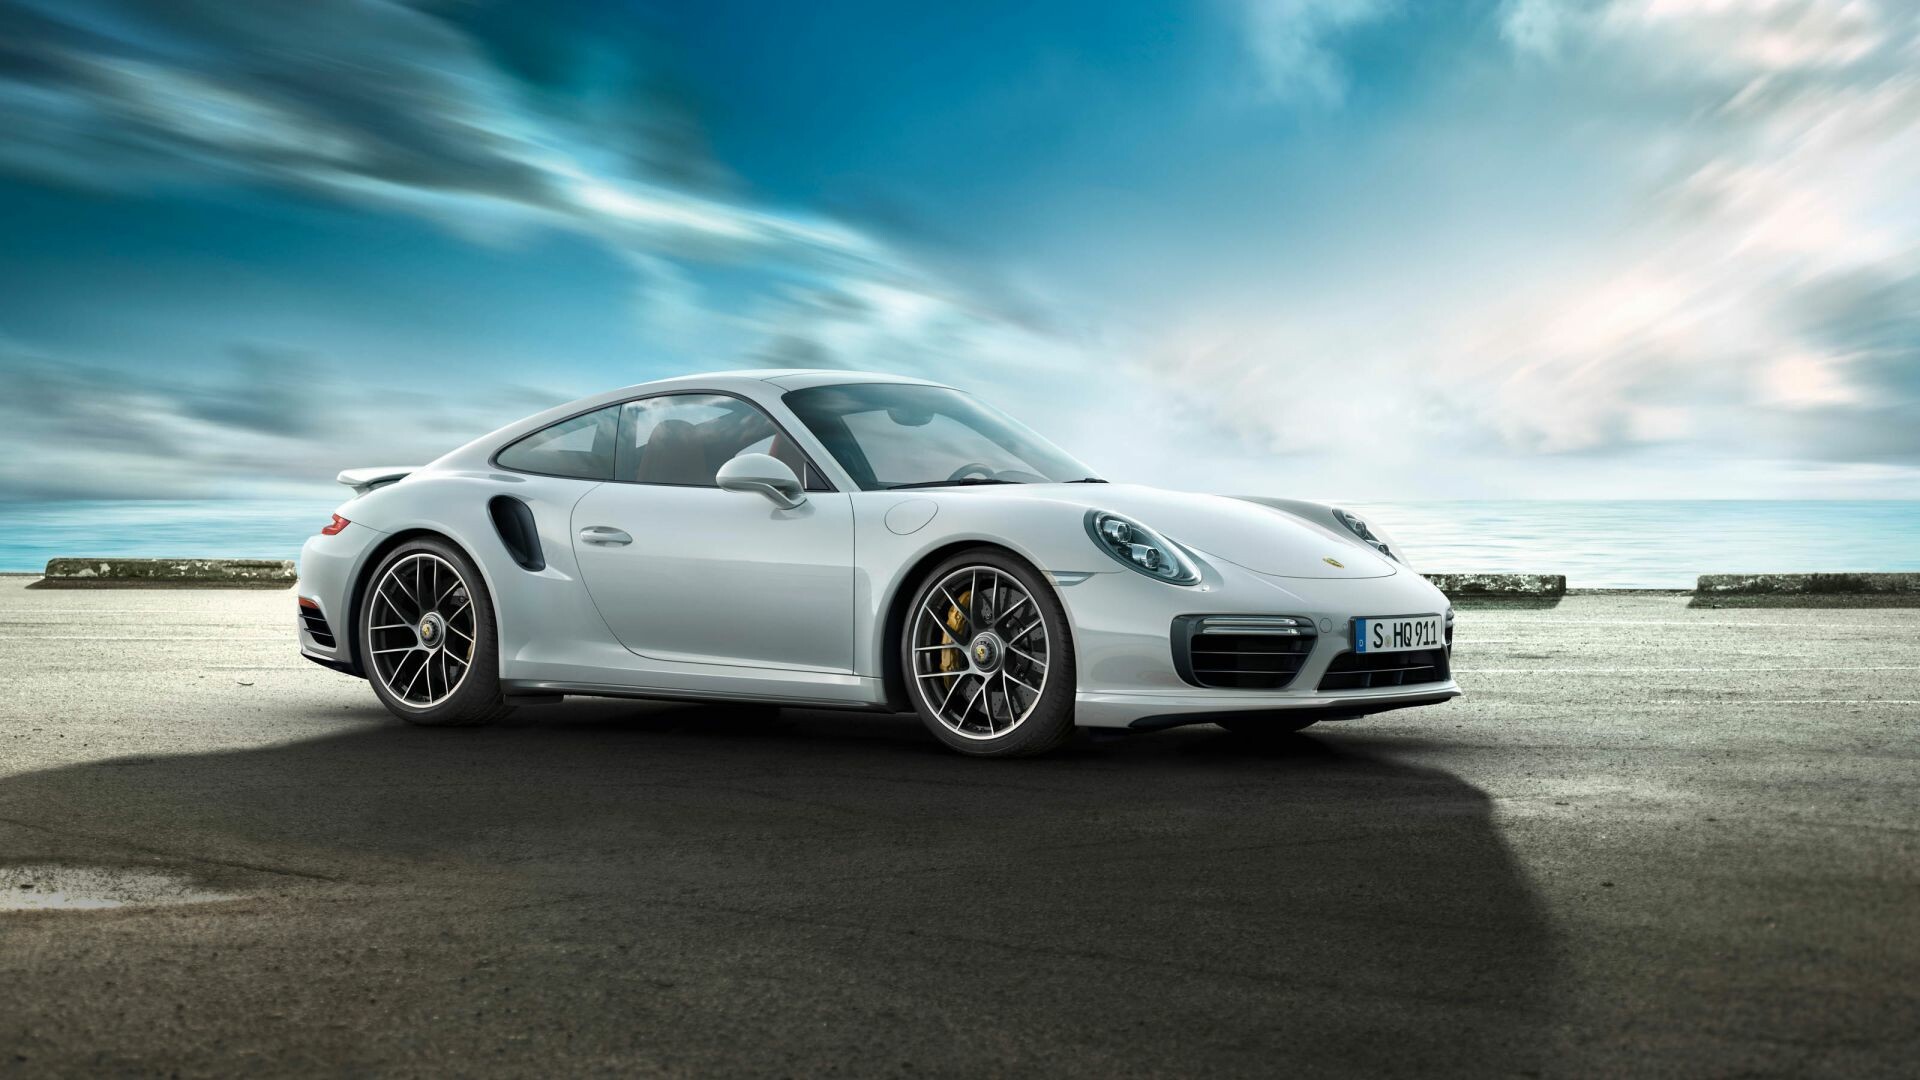 Porsche 911: The 997 GT3 RS was a homologation version of the GT3 RSR racing car. 1920x1080 Full HD Wallpaper.